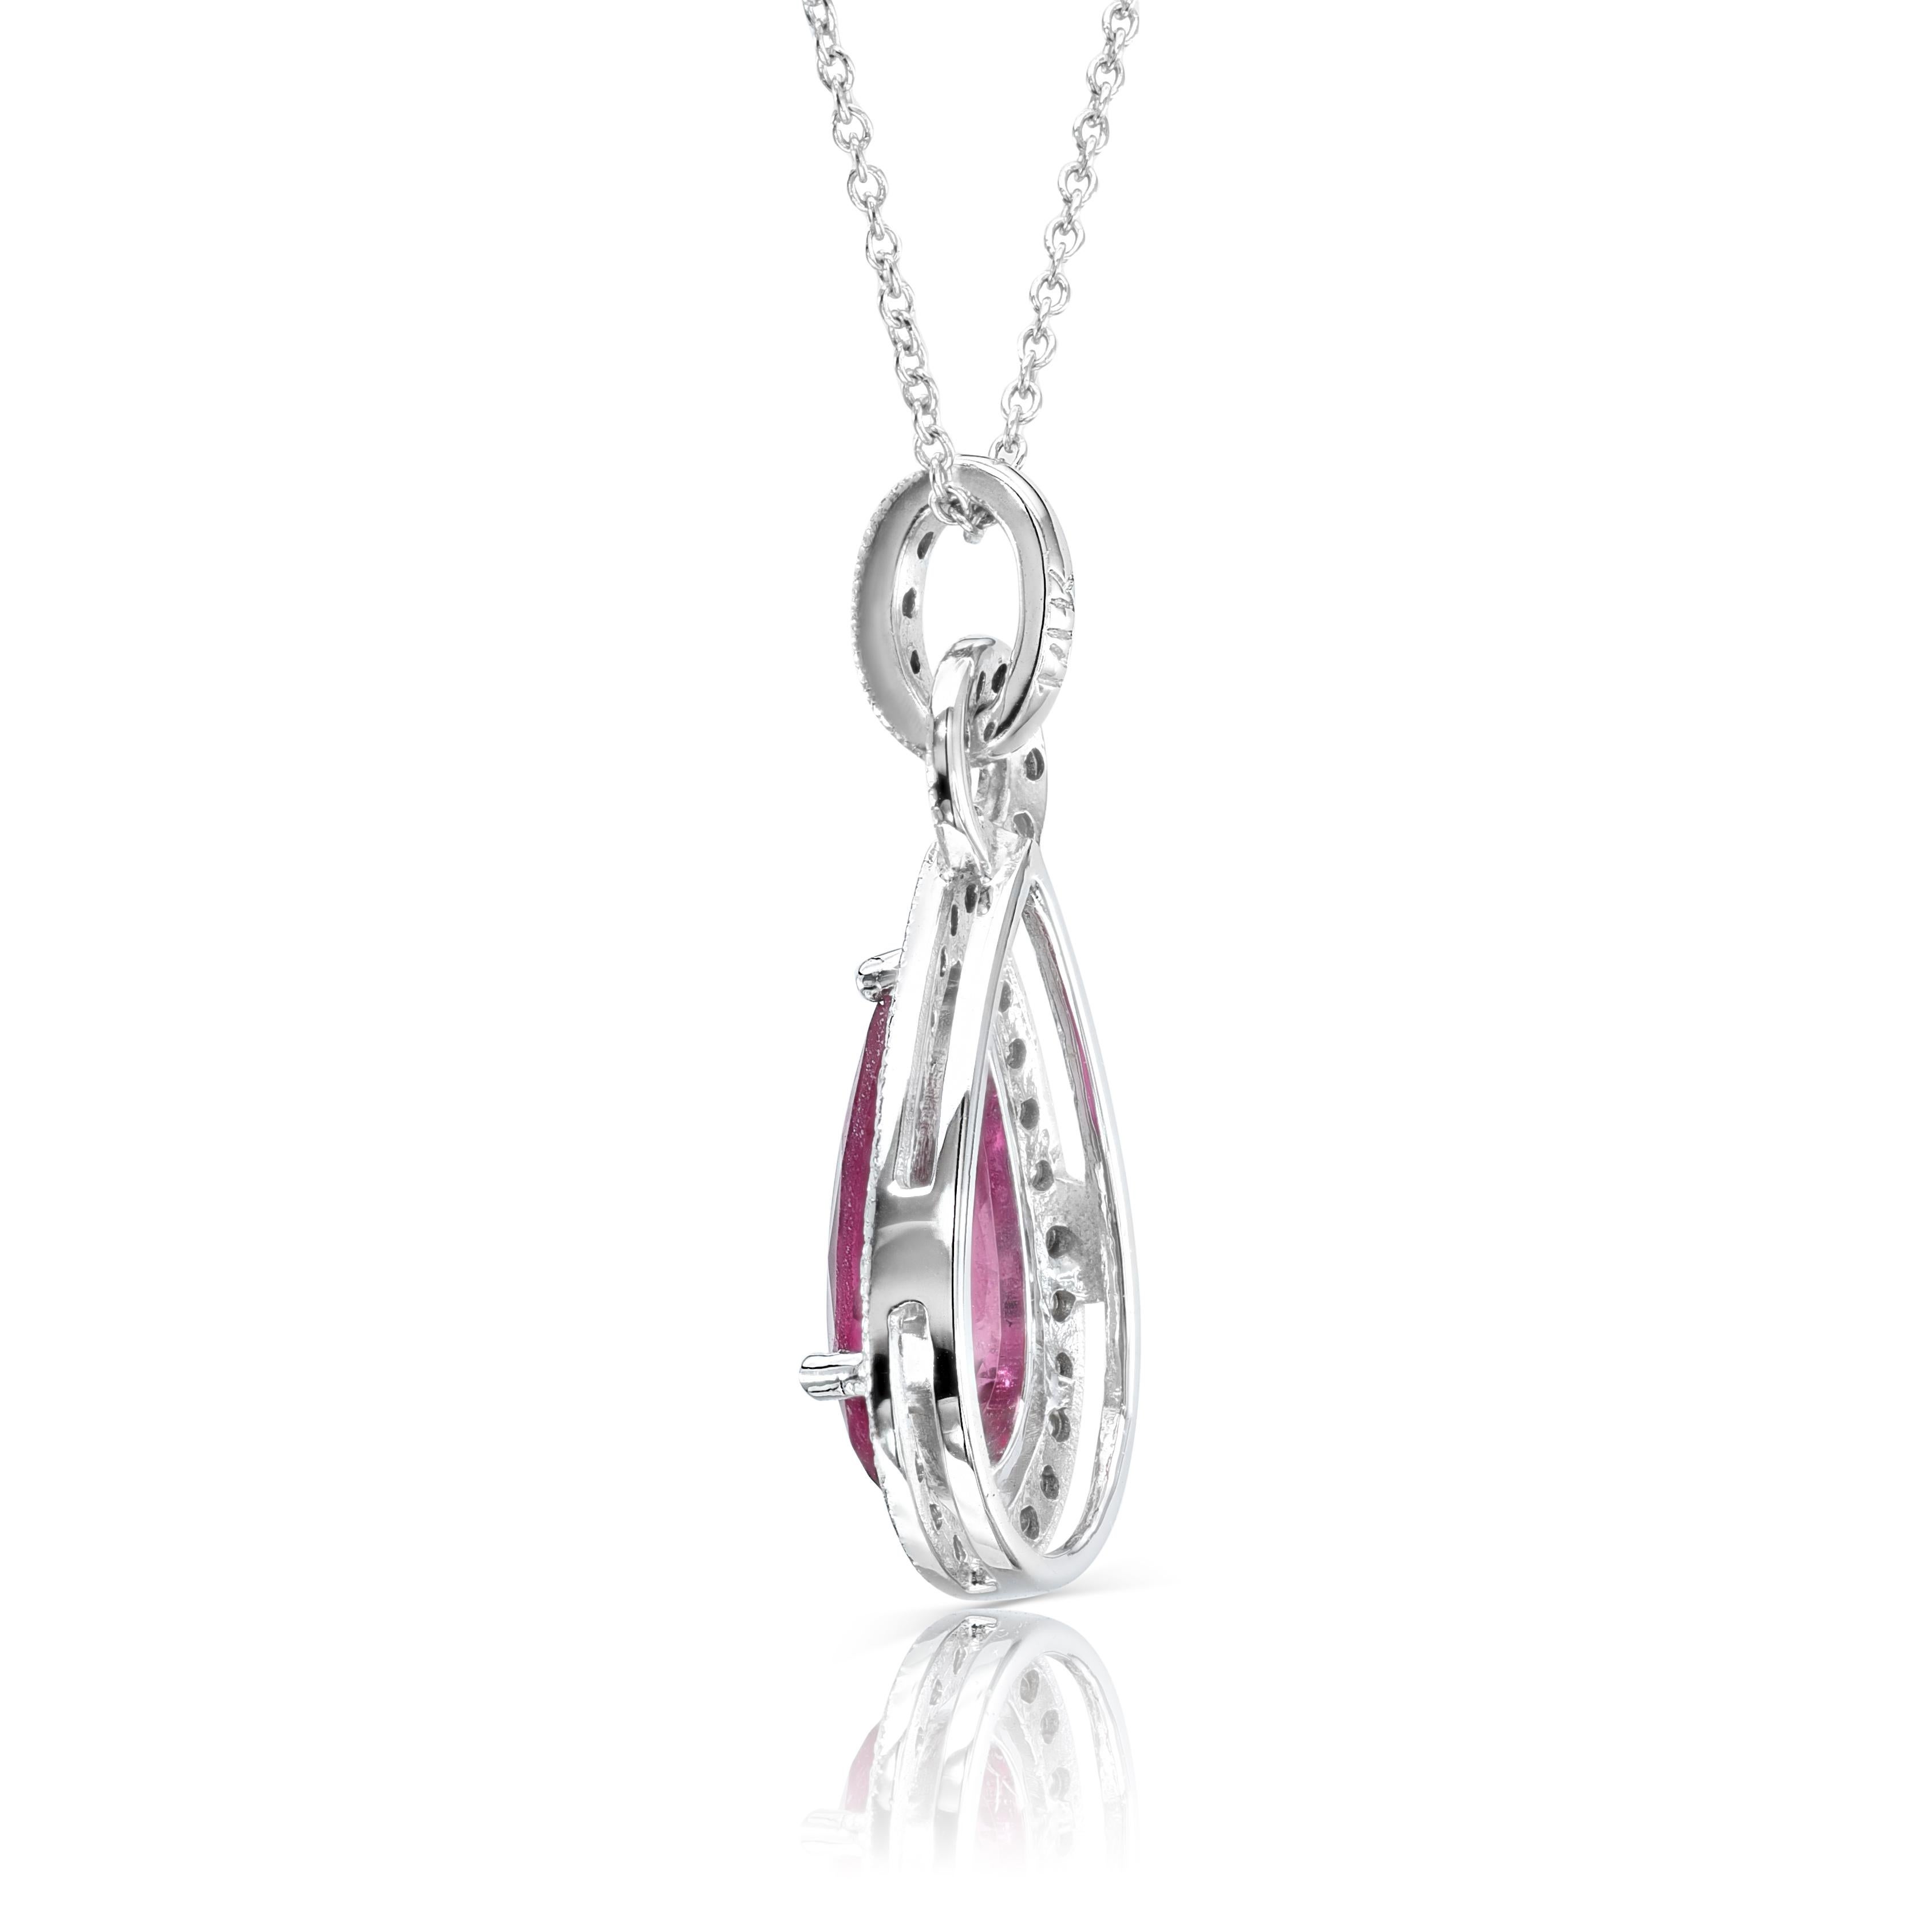 Mixed Cut 0.96 Carats Rubellite Diamonds set in 14K White Gold Pendant For Sale